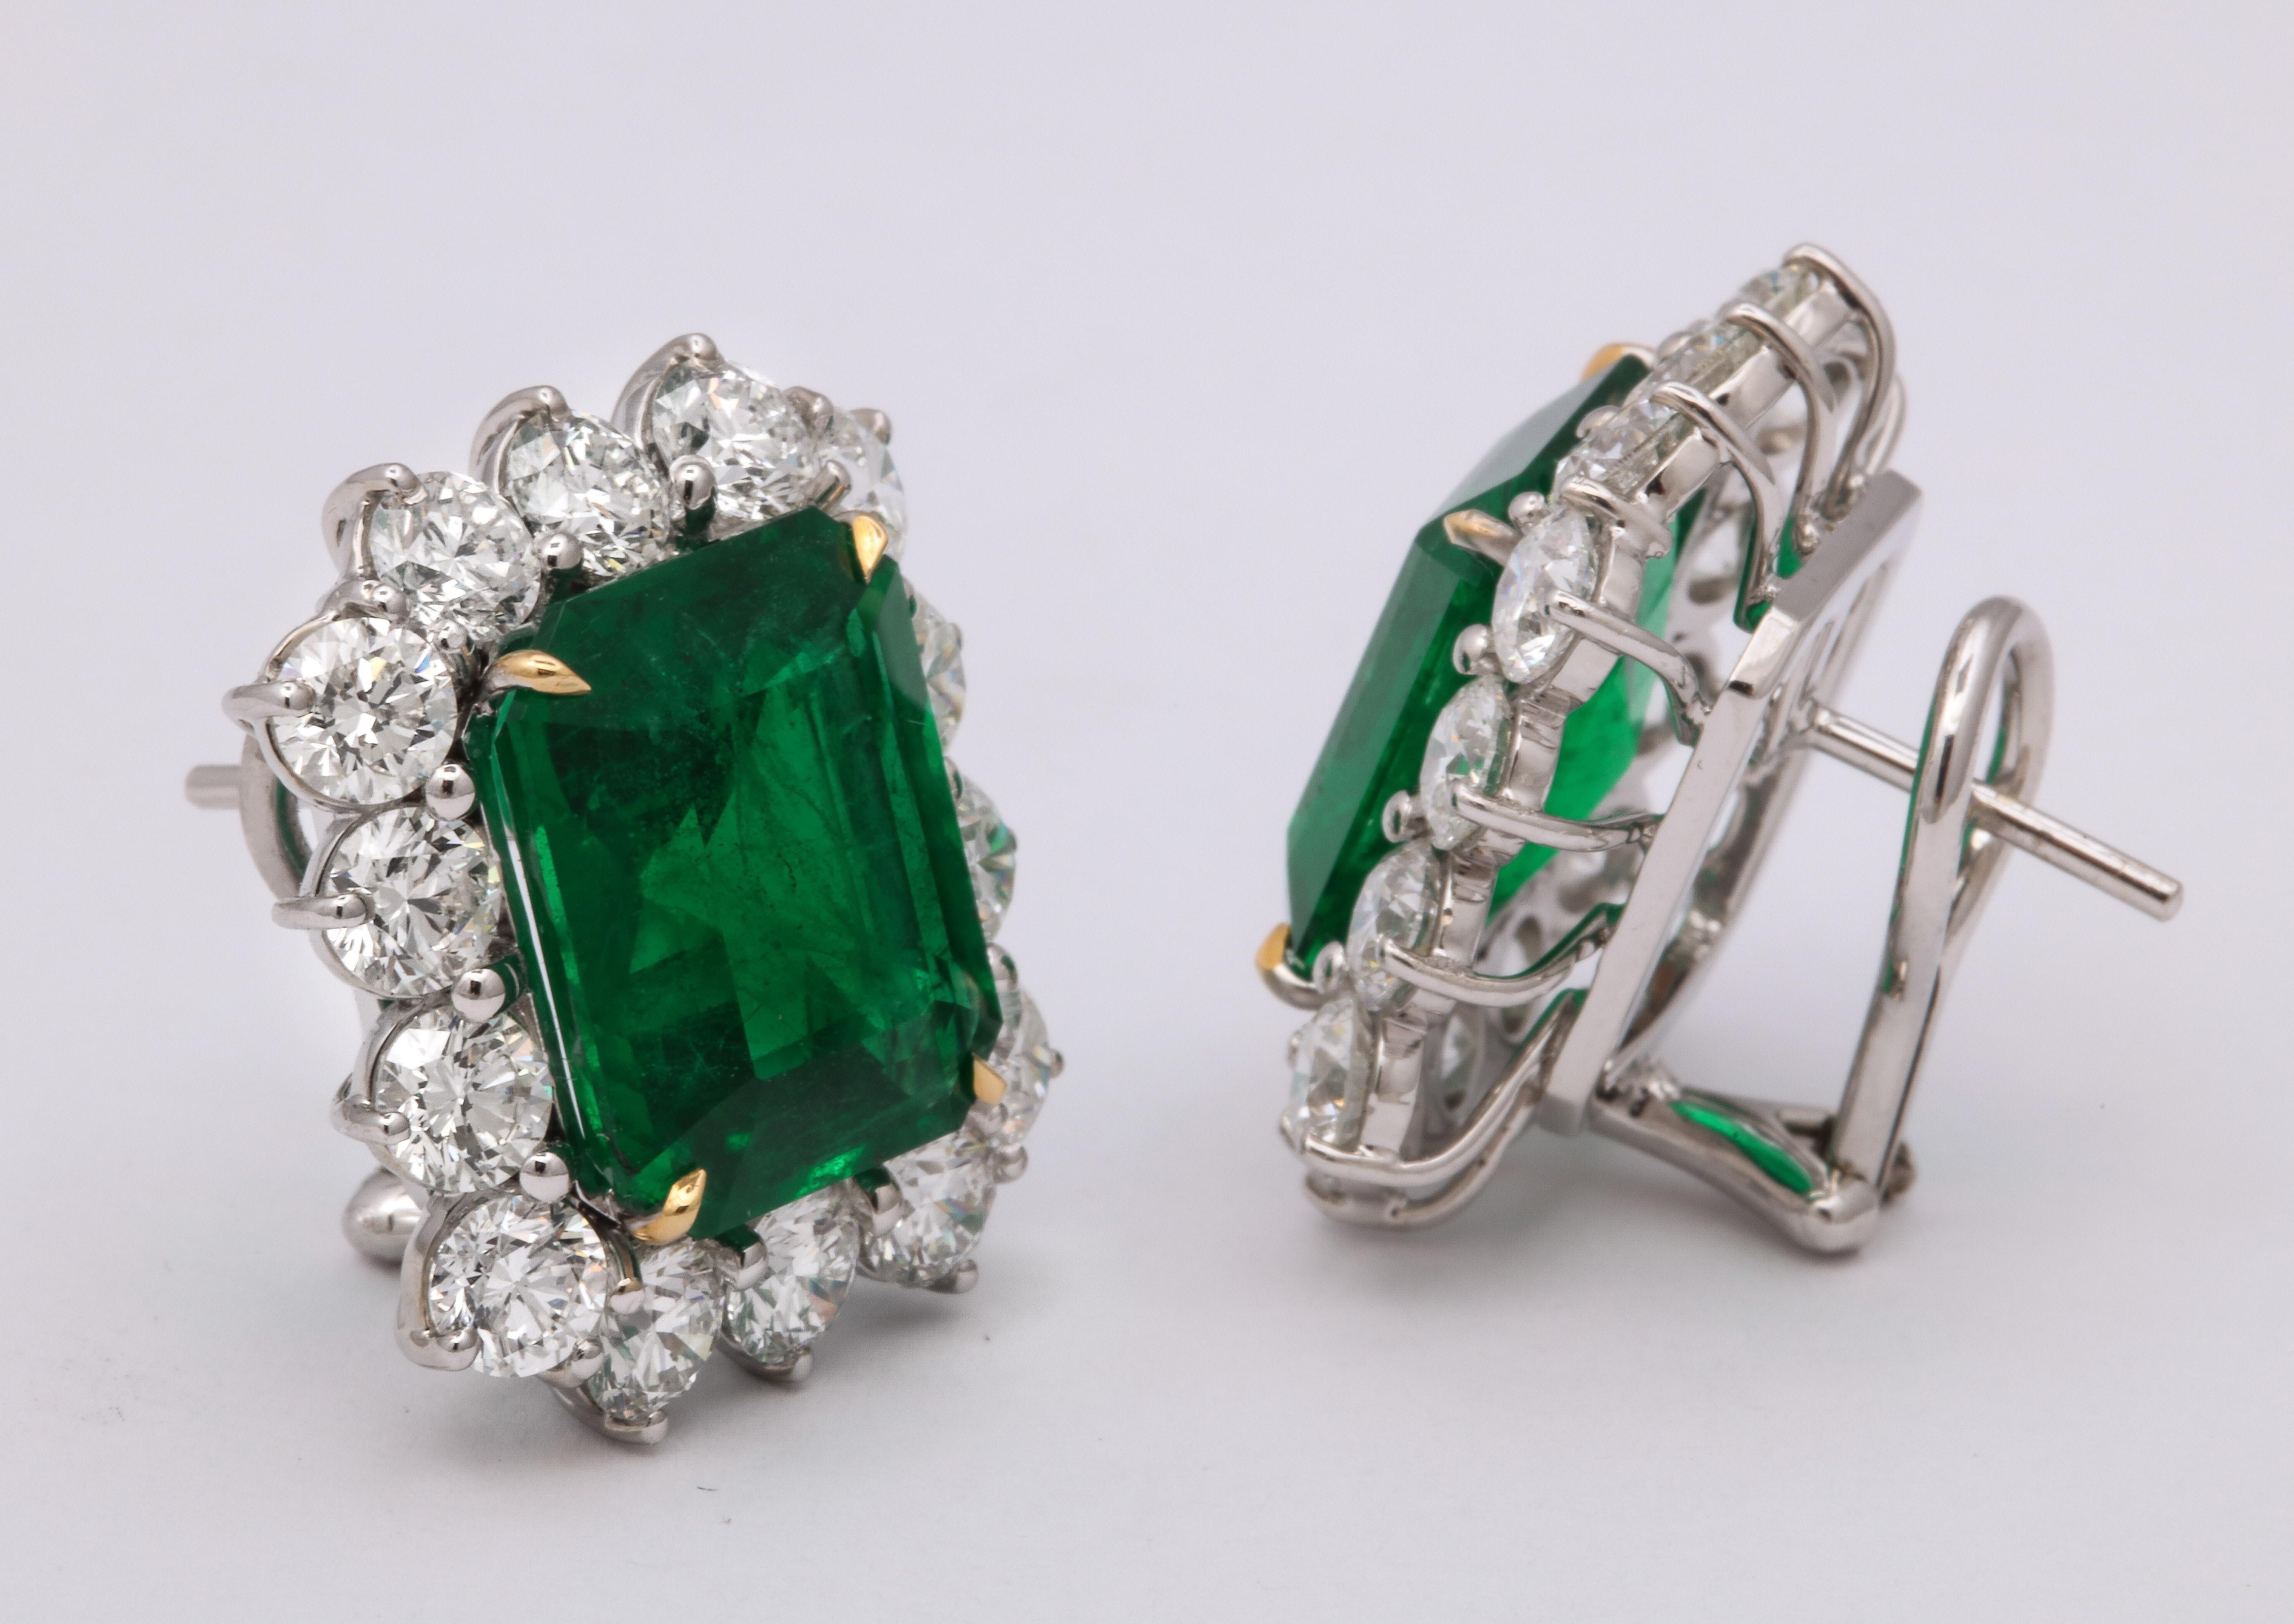 
A fabulous pair of VIVID GREEN emerald cut emerald and diamond earrings. 

14.73 carats of fine green emeralds 

7.03 carats of white round brilliant cut diamonds 

Set in 18k white gold with yellow prongs. 

Certified by Christian Dunaigre of